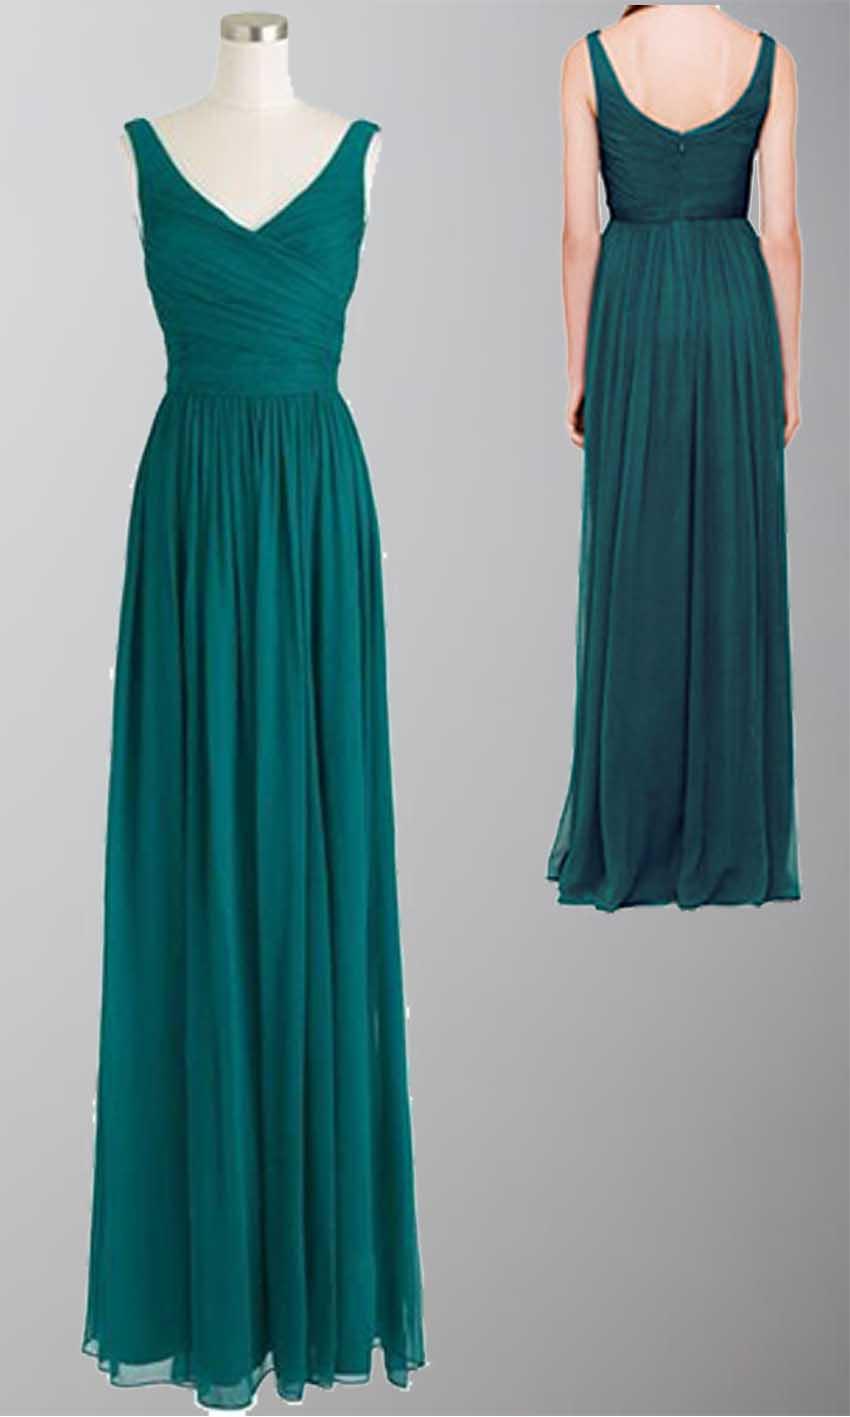 Mariage - Long Chiffon Rich Peacock Bridesmaid Dresses KSP177 [KSP177] - £92.00 : Cheap Prom Dresses Uk, Bridesmaid Dresses, 2014 Prom & Evening Dresses, Look for cheap elegant prom dresses 2014, cocktail gowns, or dresses for special occasions? kissprom.co.uk offe